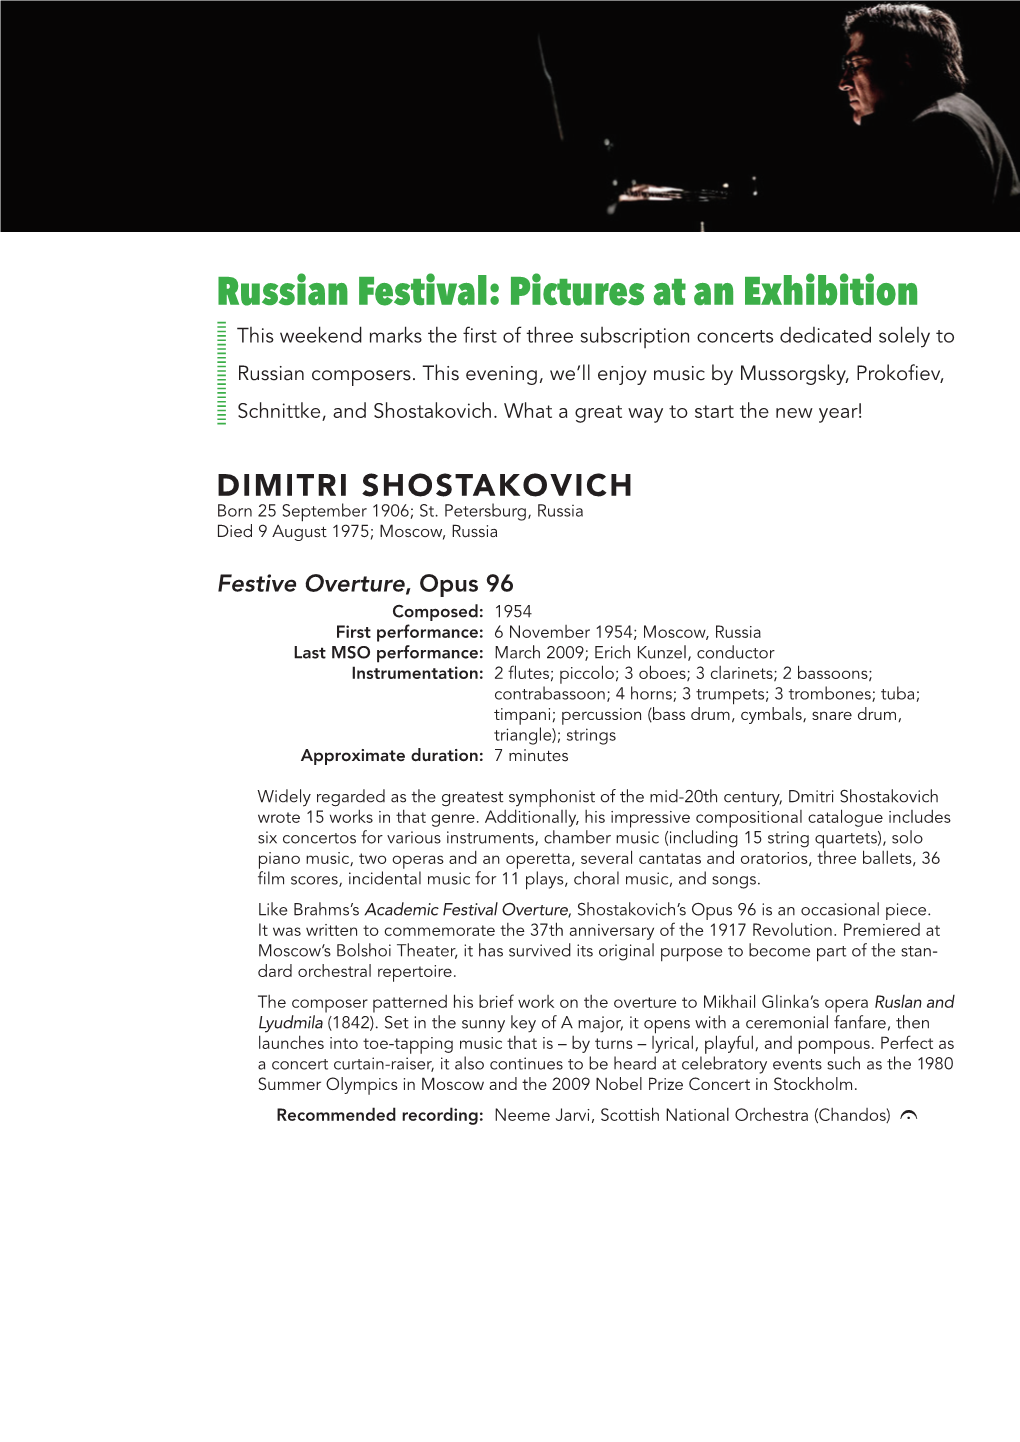 Russian Festival: Pictures at an Exhibition This Weekend Marks the First of Three Subscription Concerts Dedicated Solely to Russian Composers